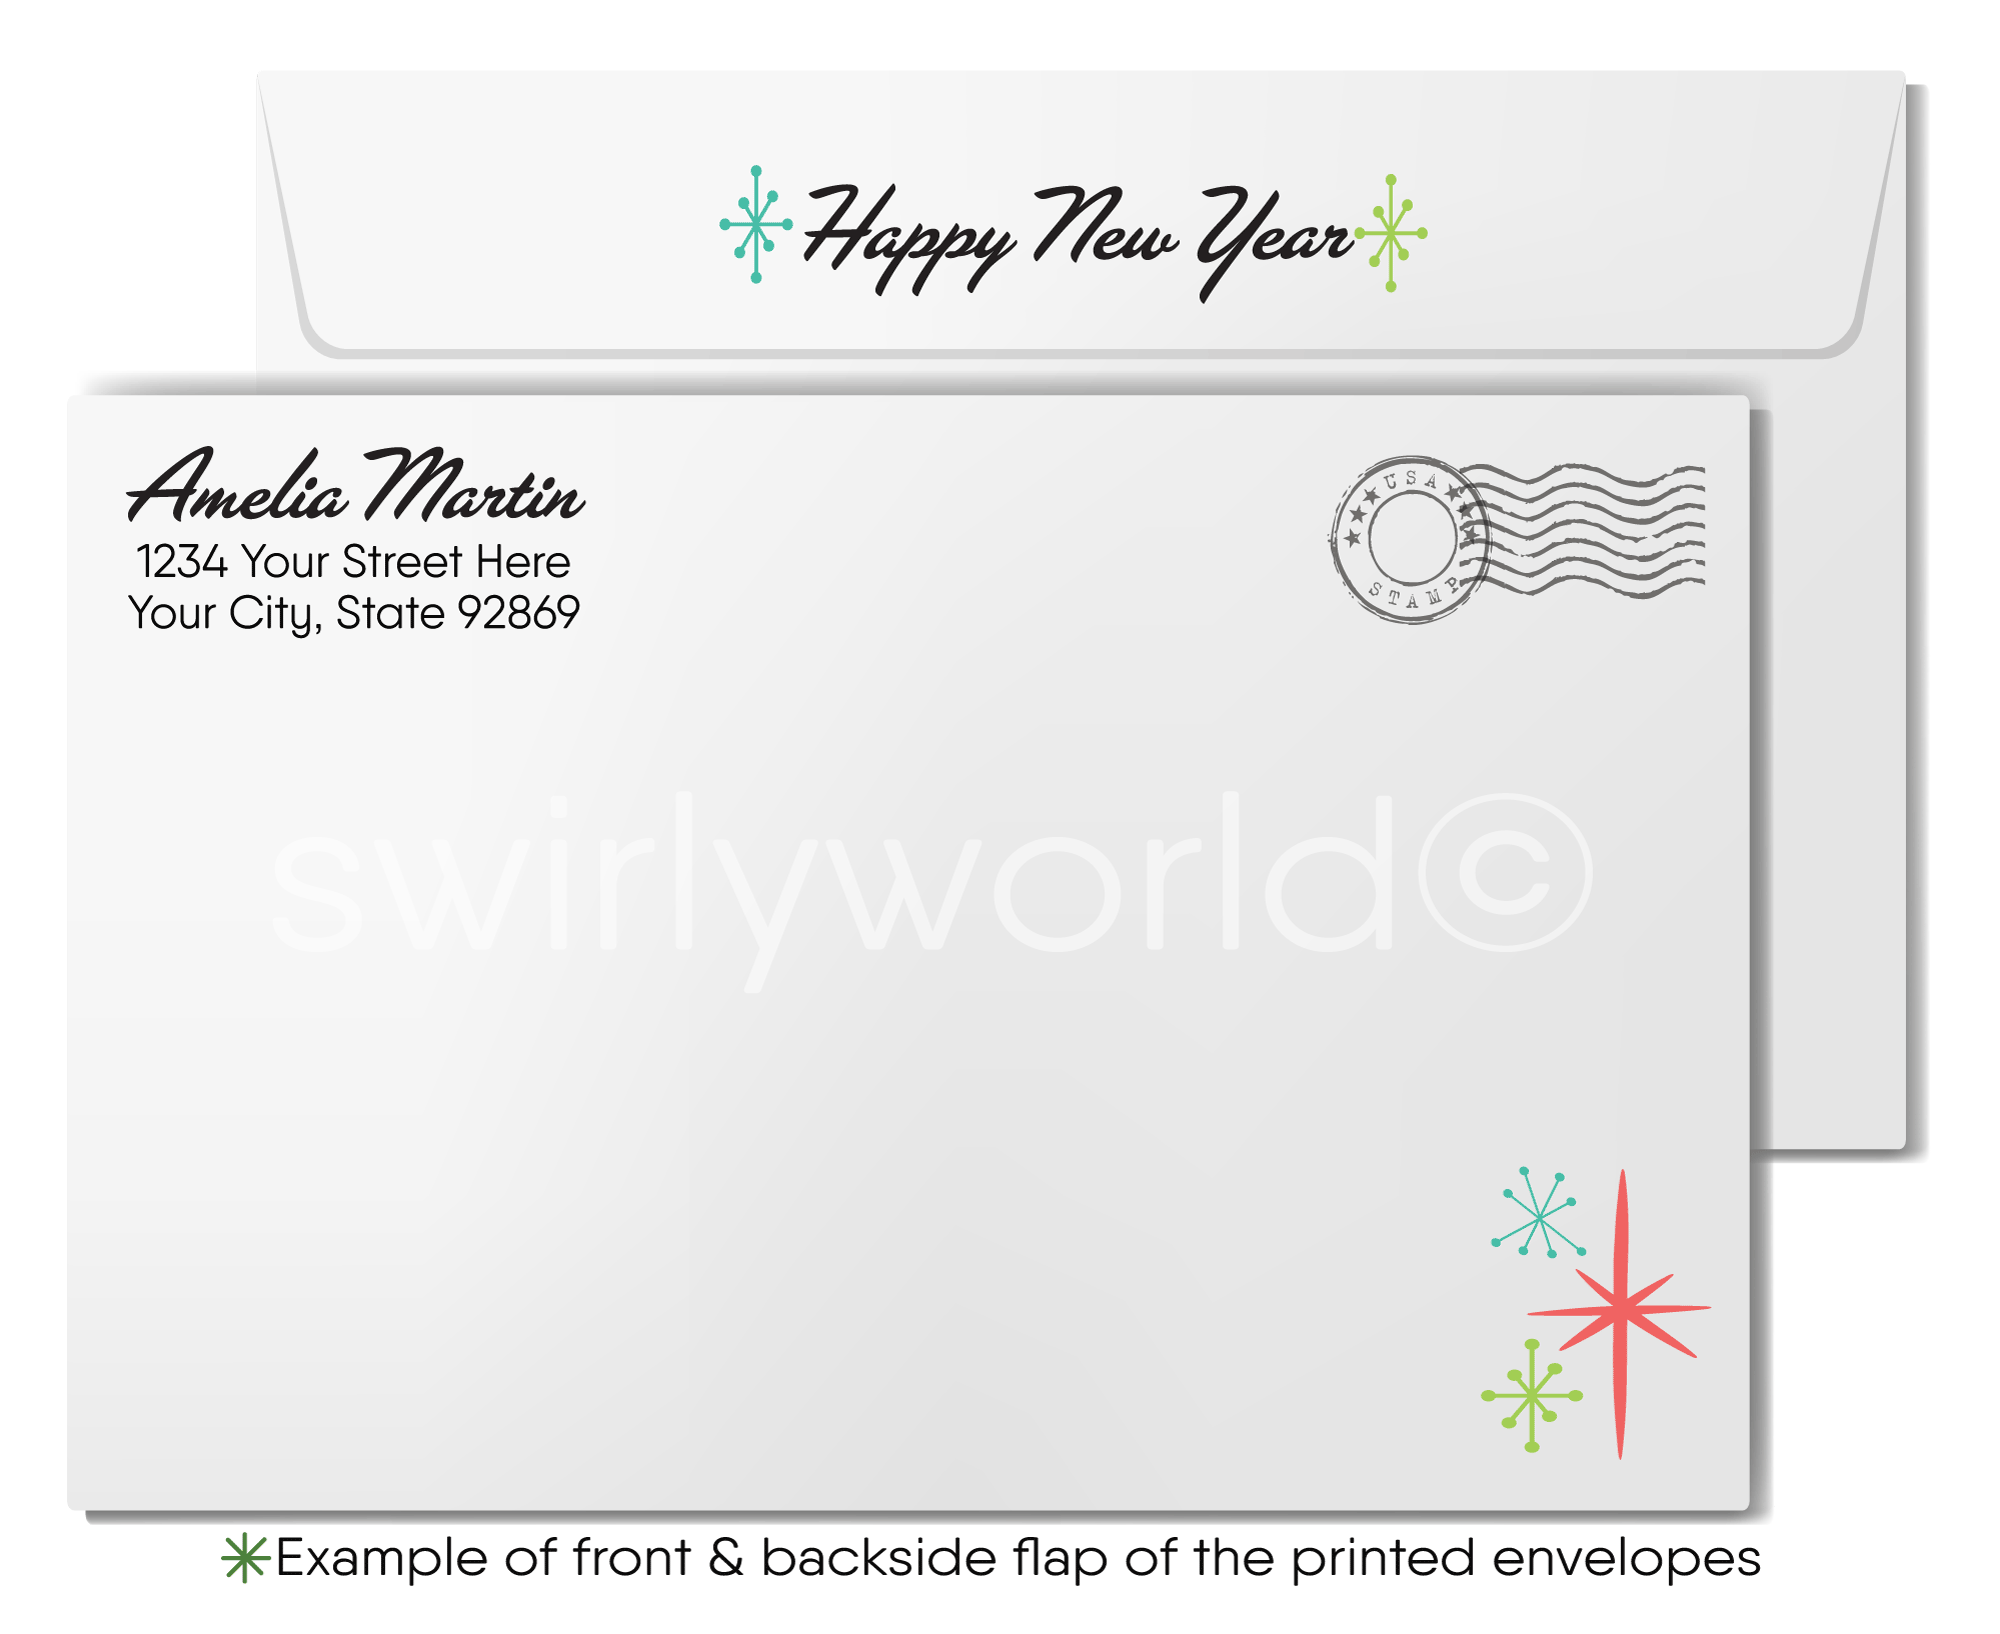 2024 'Happy New Year' Holiday Greeting Cards and Envelopes - 25 Per Pack